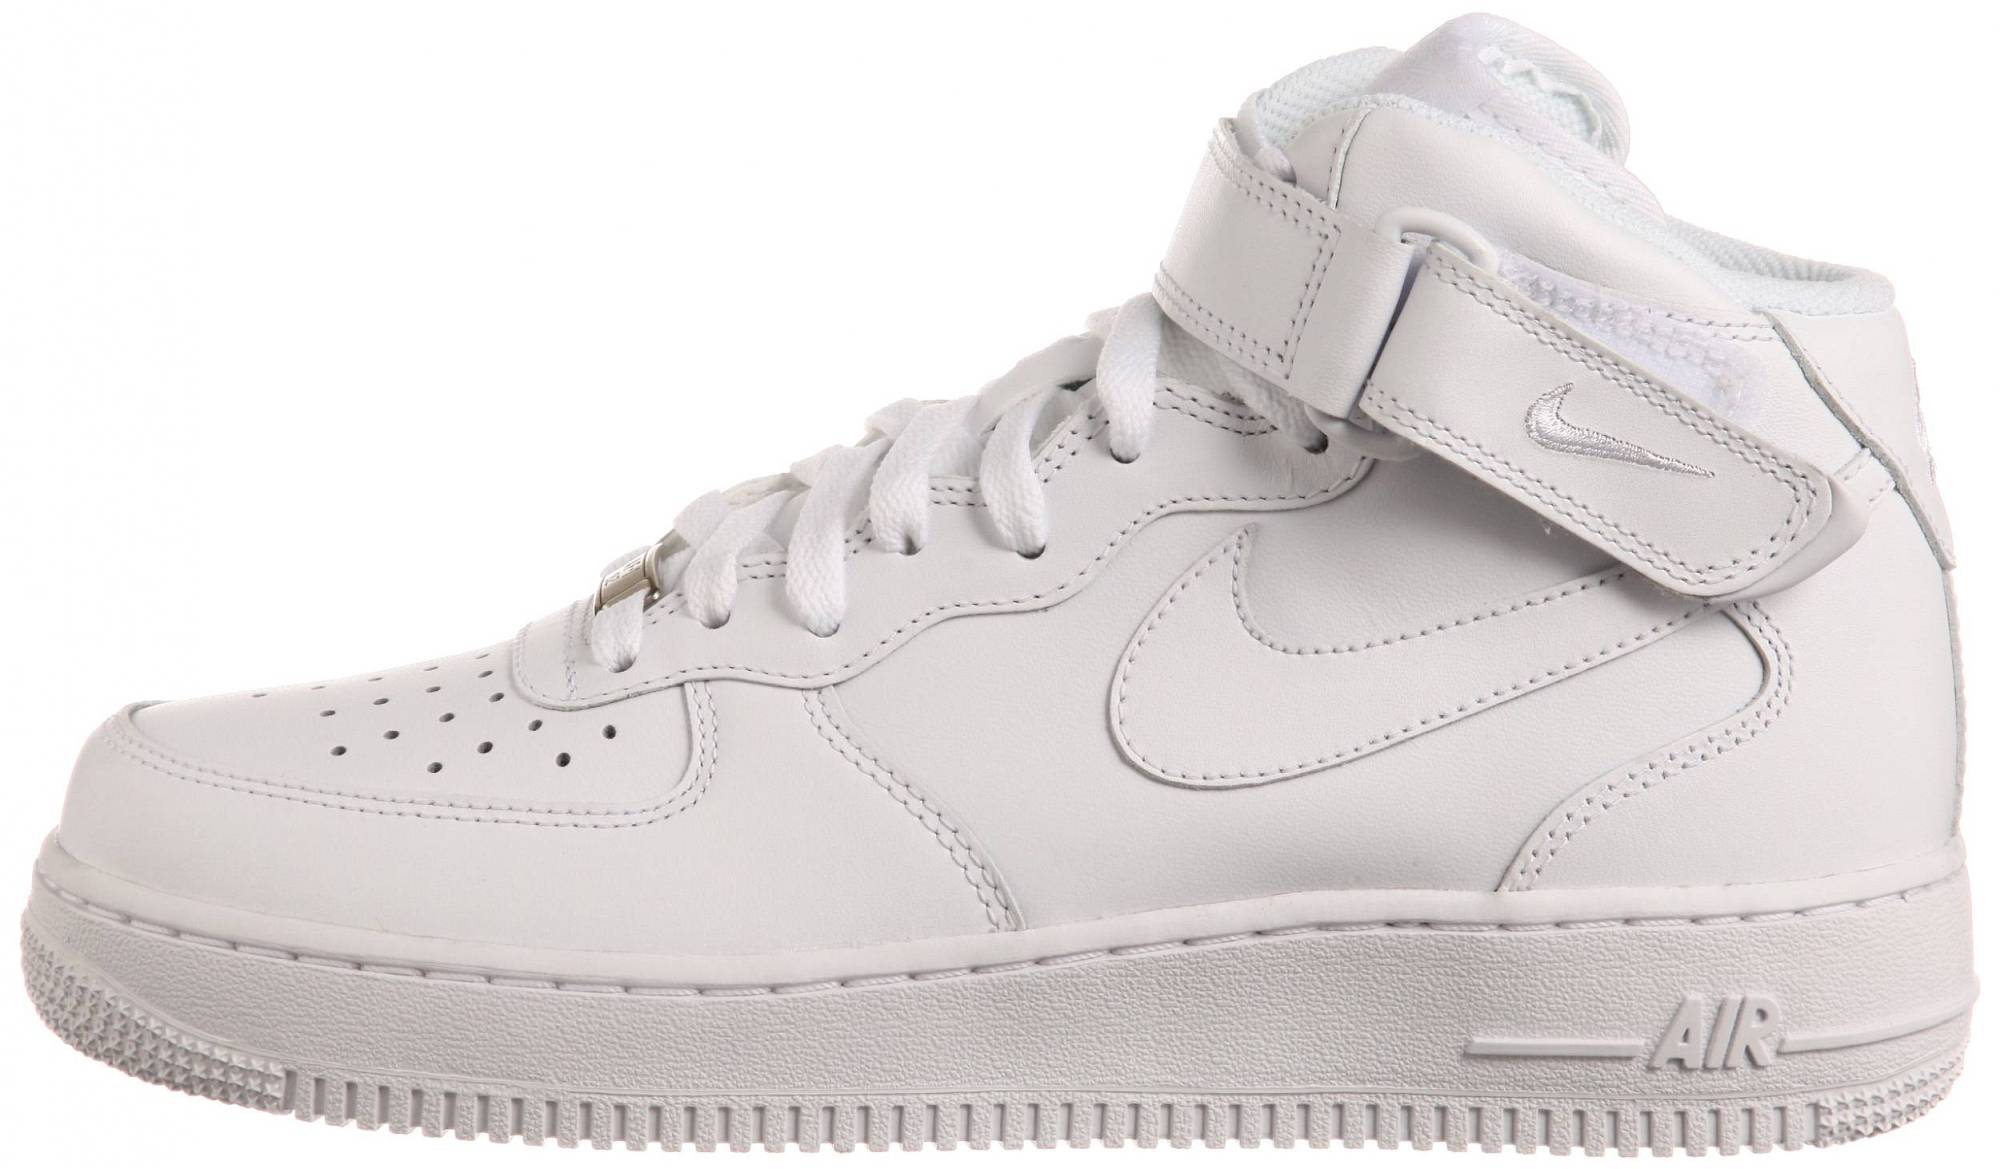 Mid Top Air Forces - Airforce Military